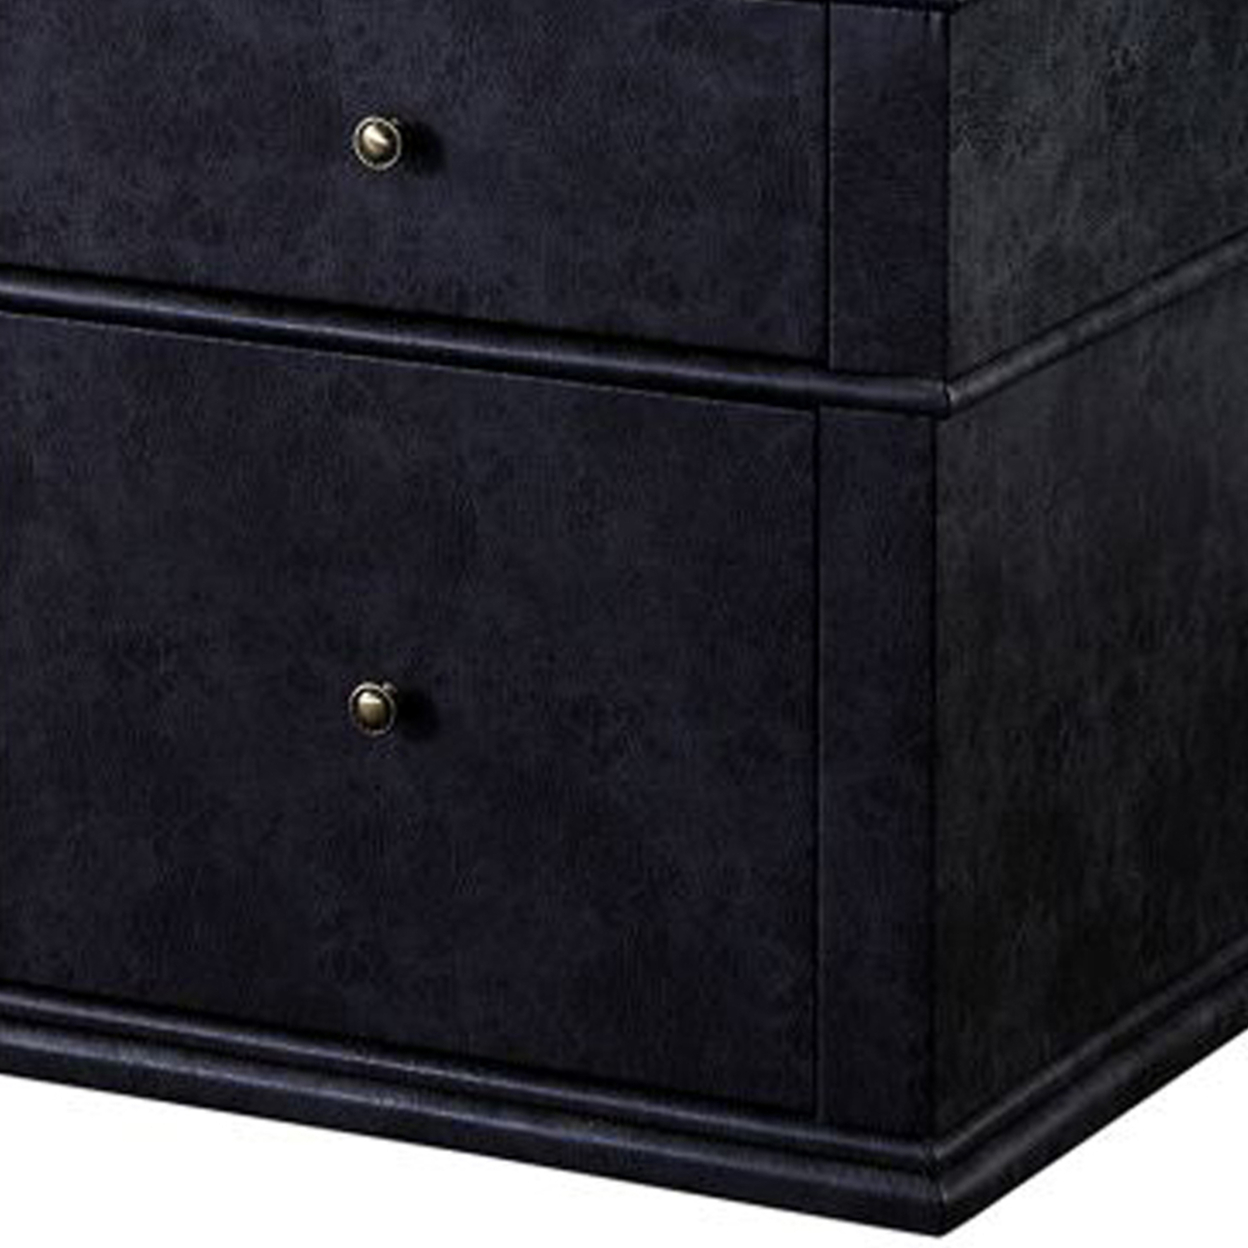 Textured Faux Leather Upholstered Wooden Nightstand With Two Drawers, Dark Gray- Saltoro Sherpi